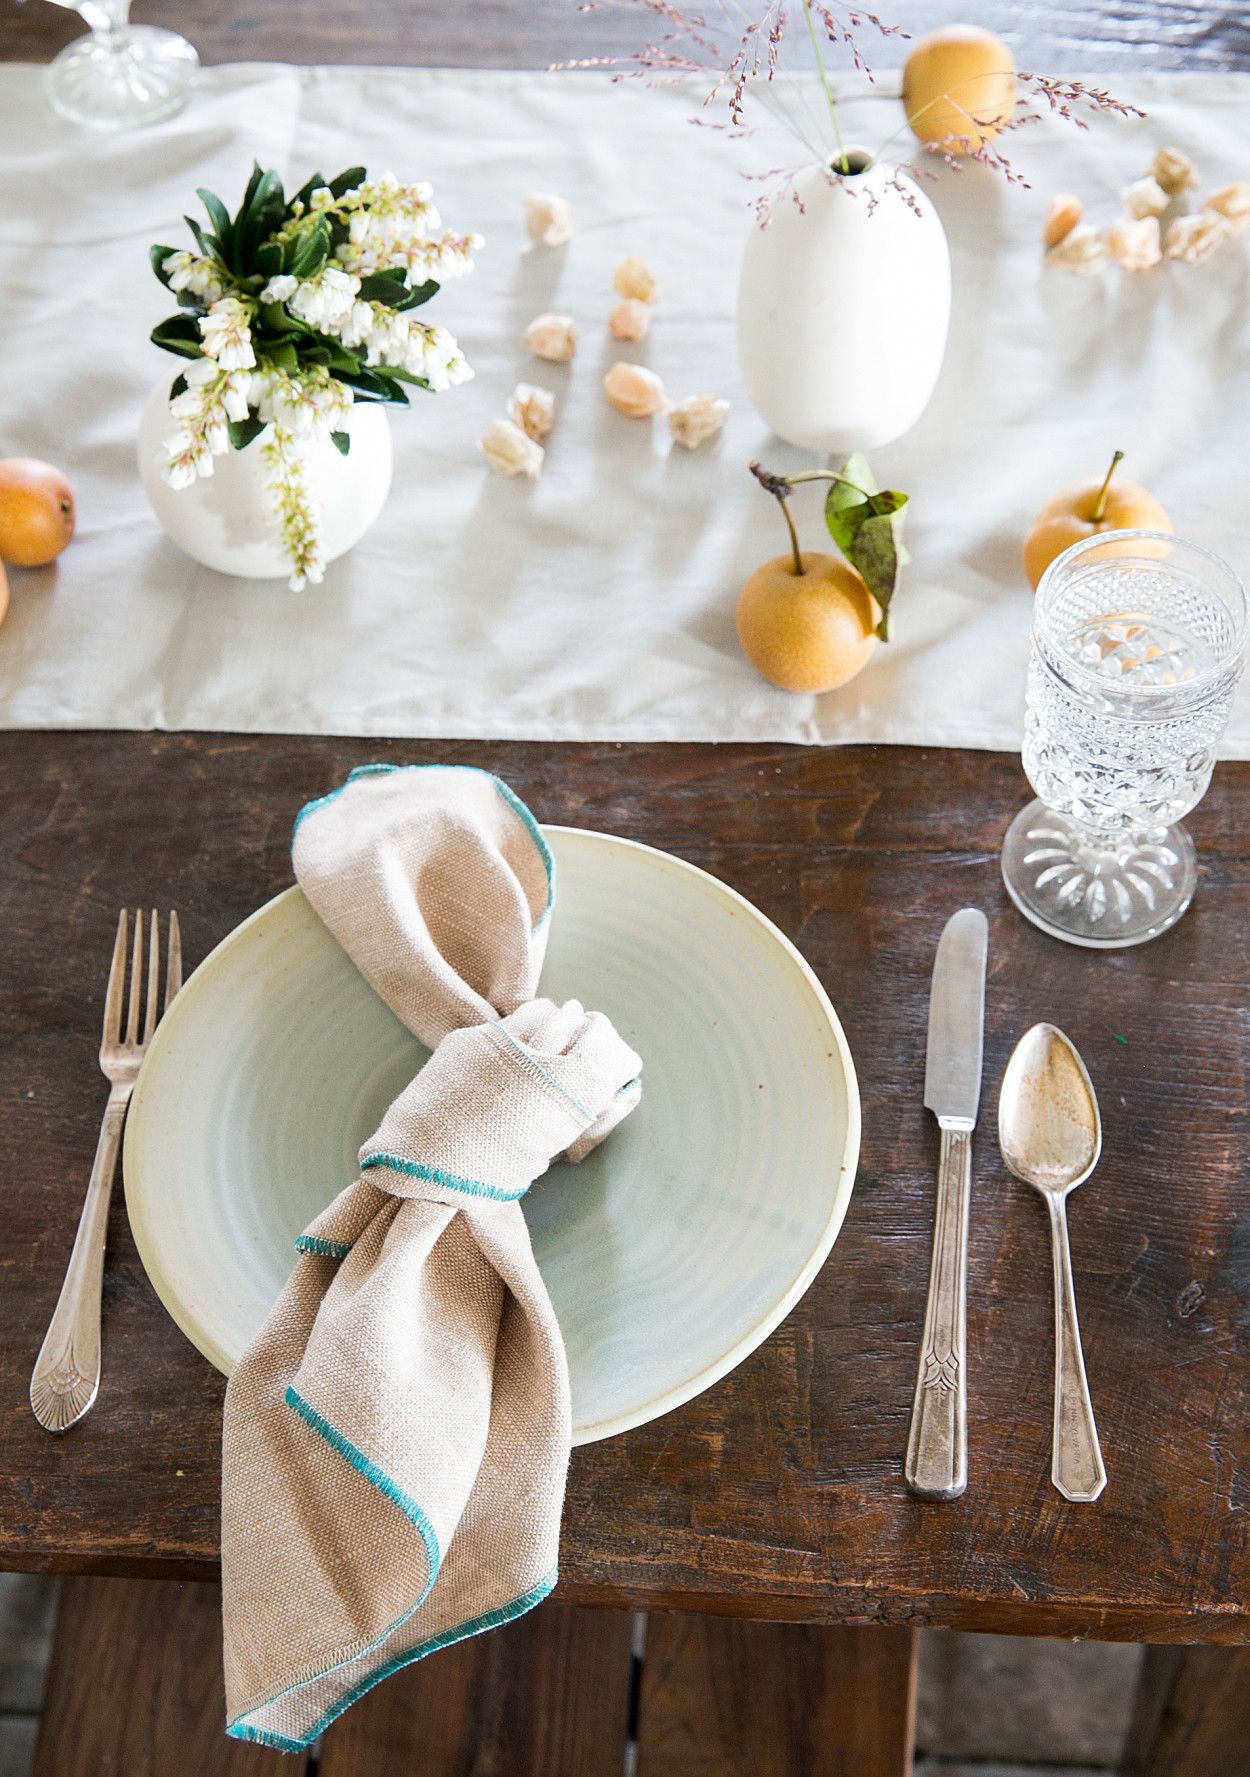 Linen napkins when you have guests over for dinner